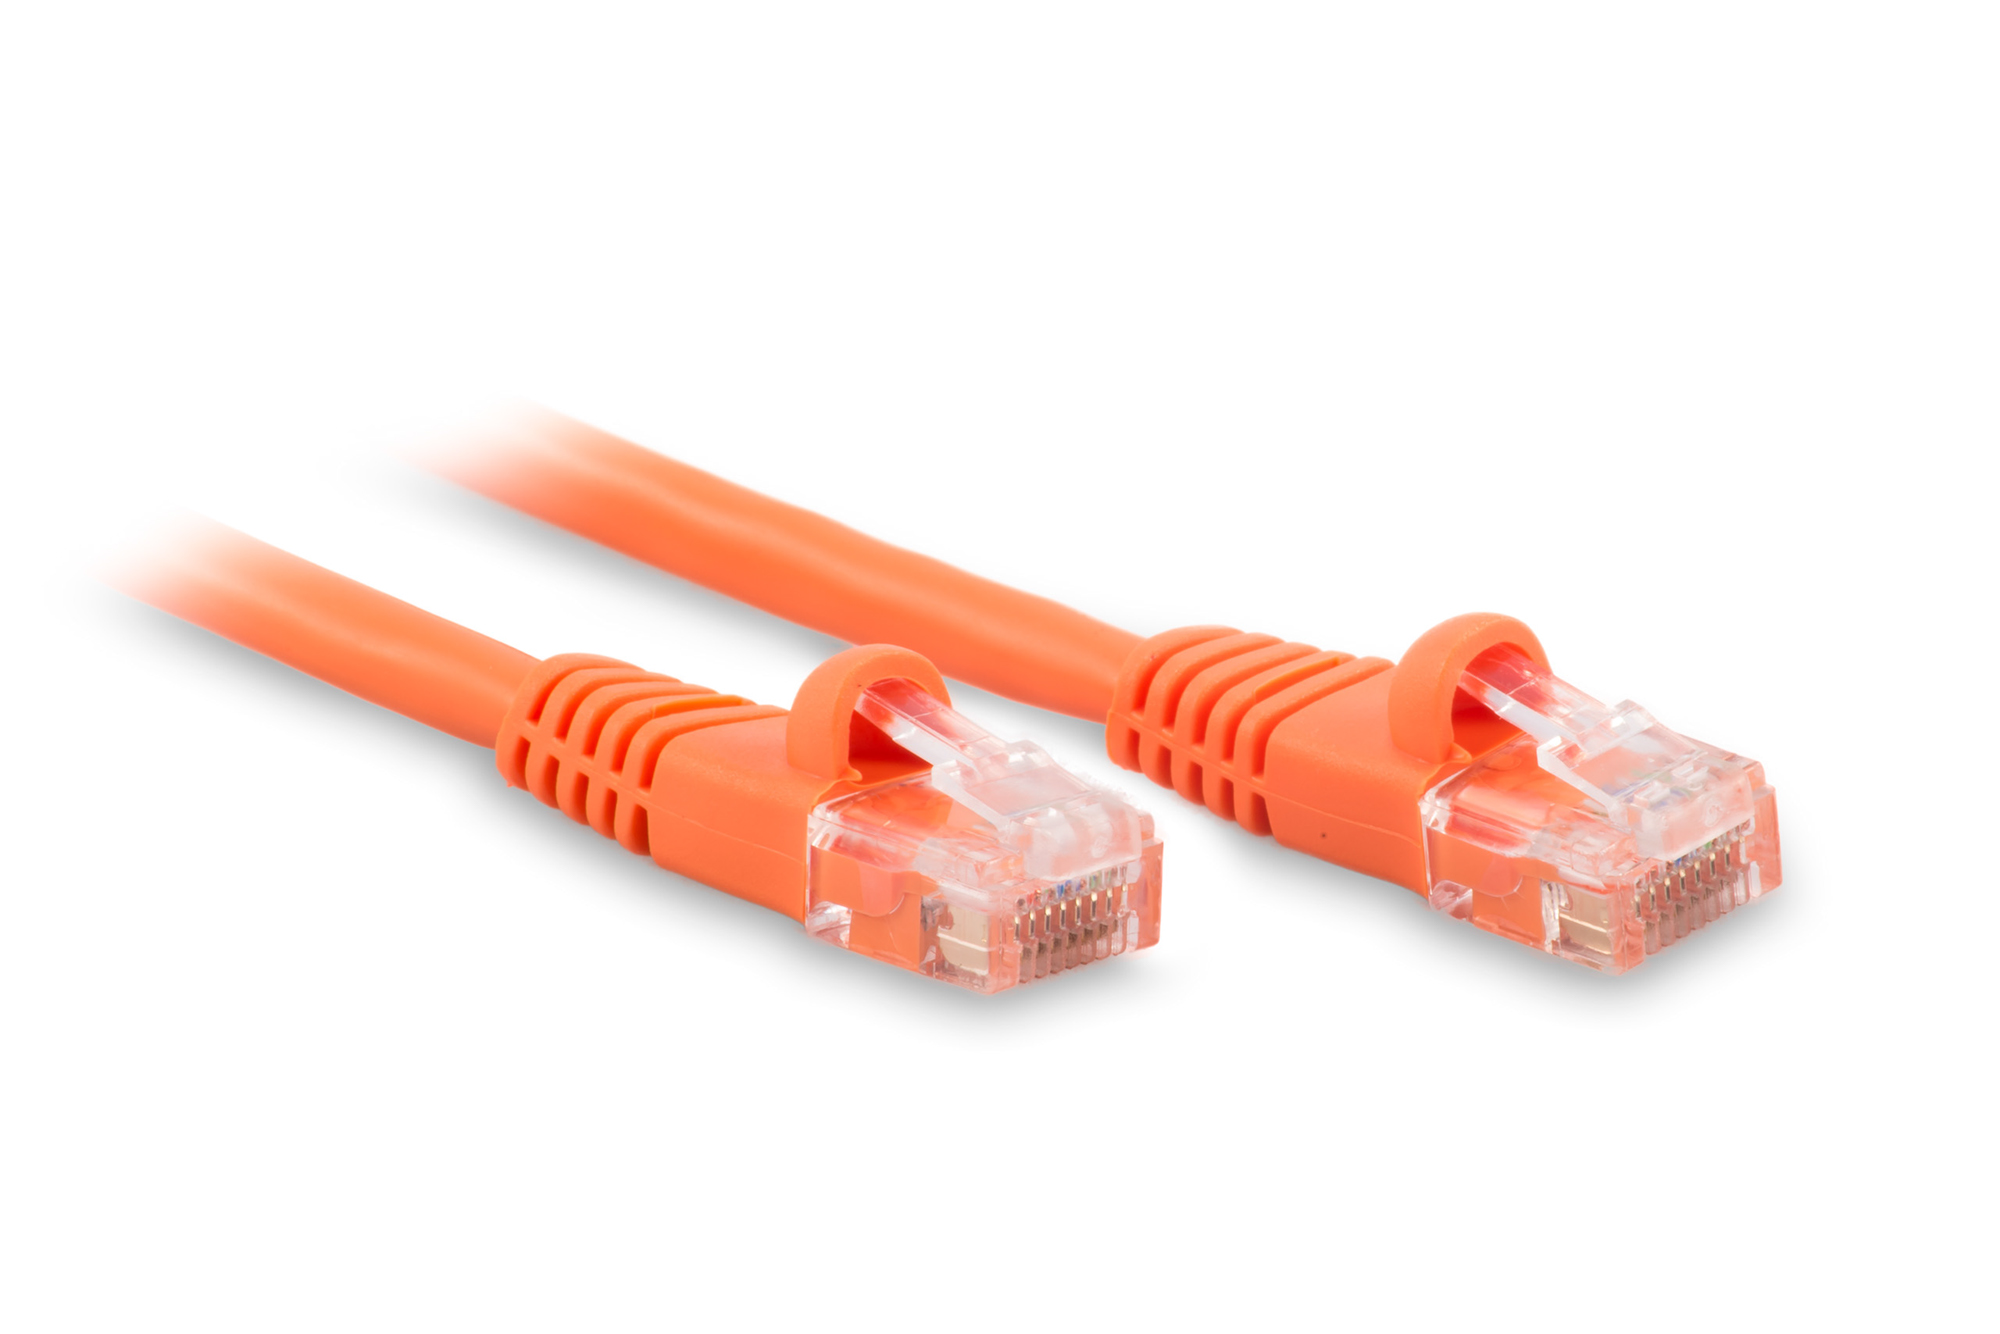 150ft Cat6 Ethernet Patch Cable - Orange Color - Snagless Boot